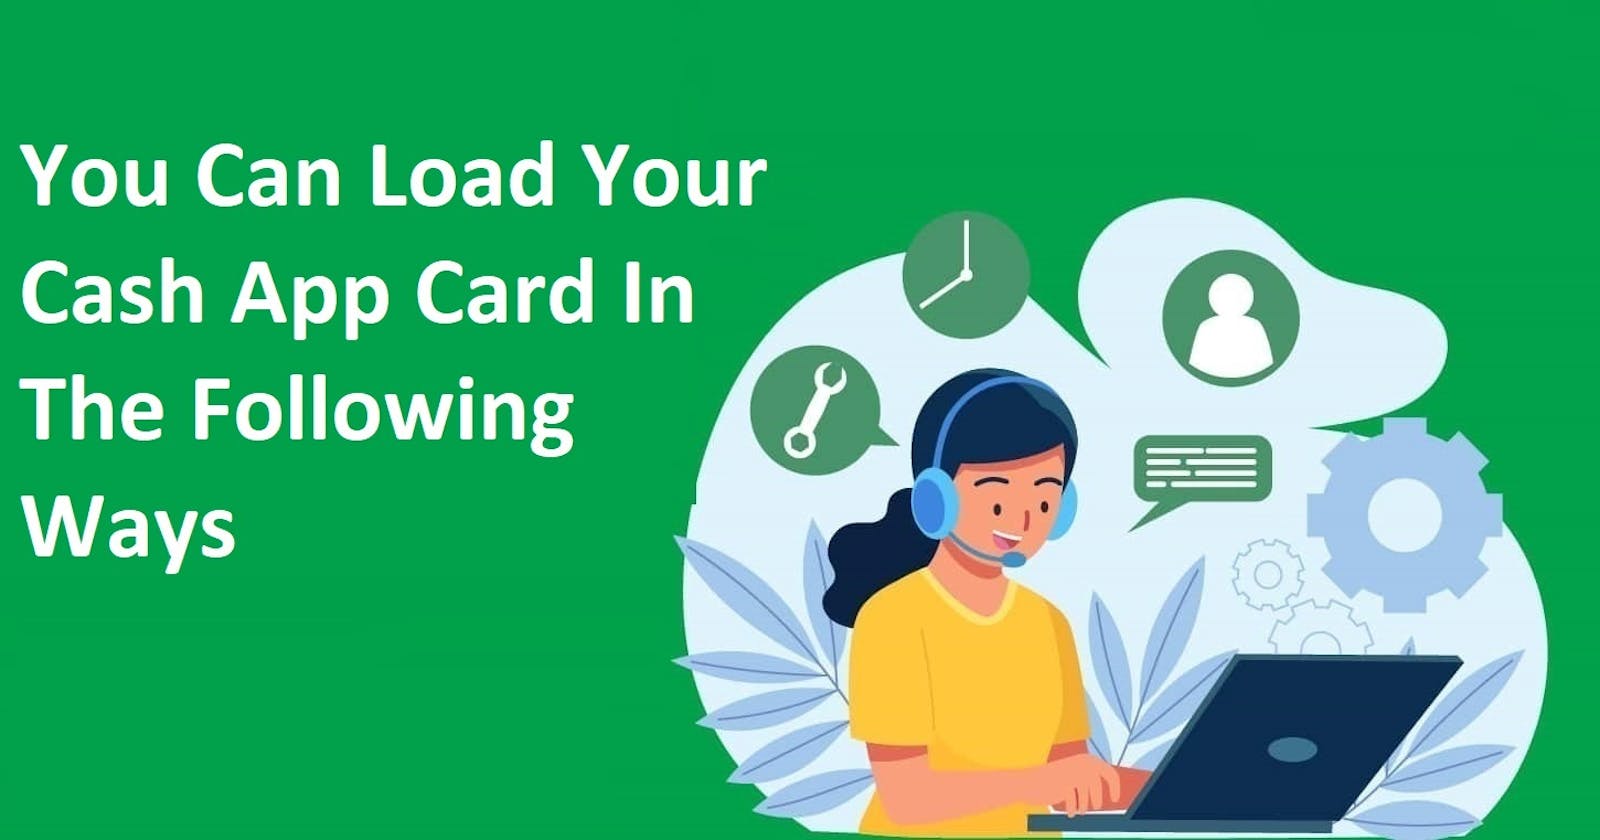 You Can Load Your Cash App Card In The Following Ways